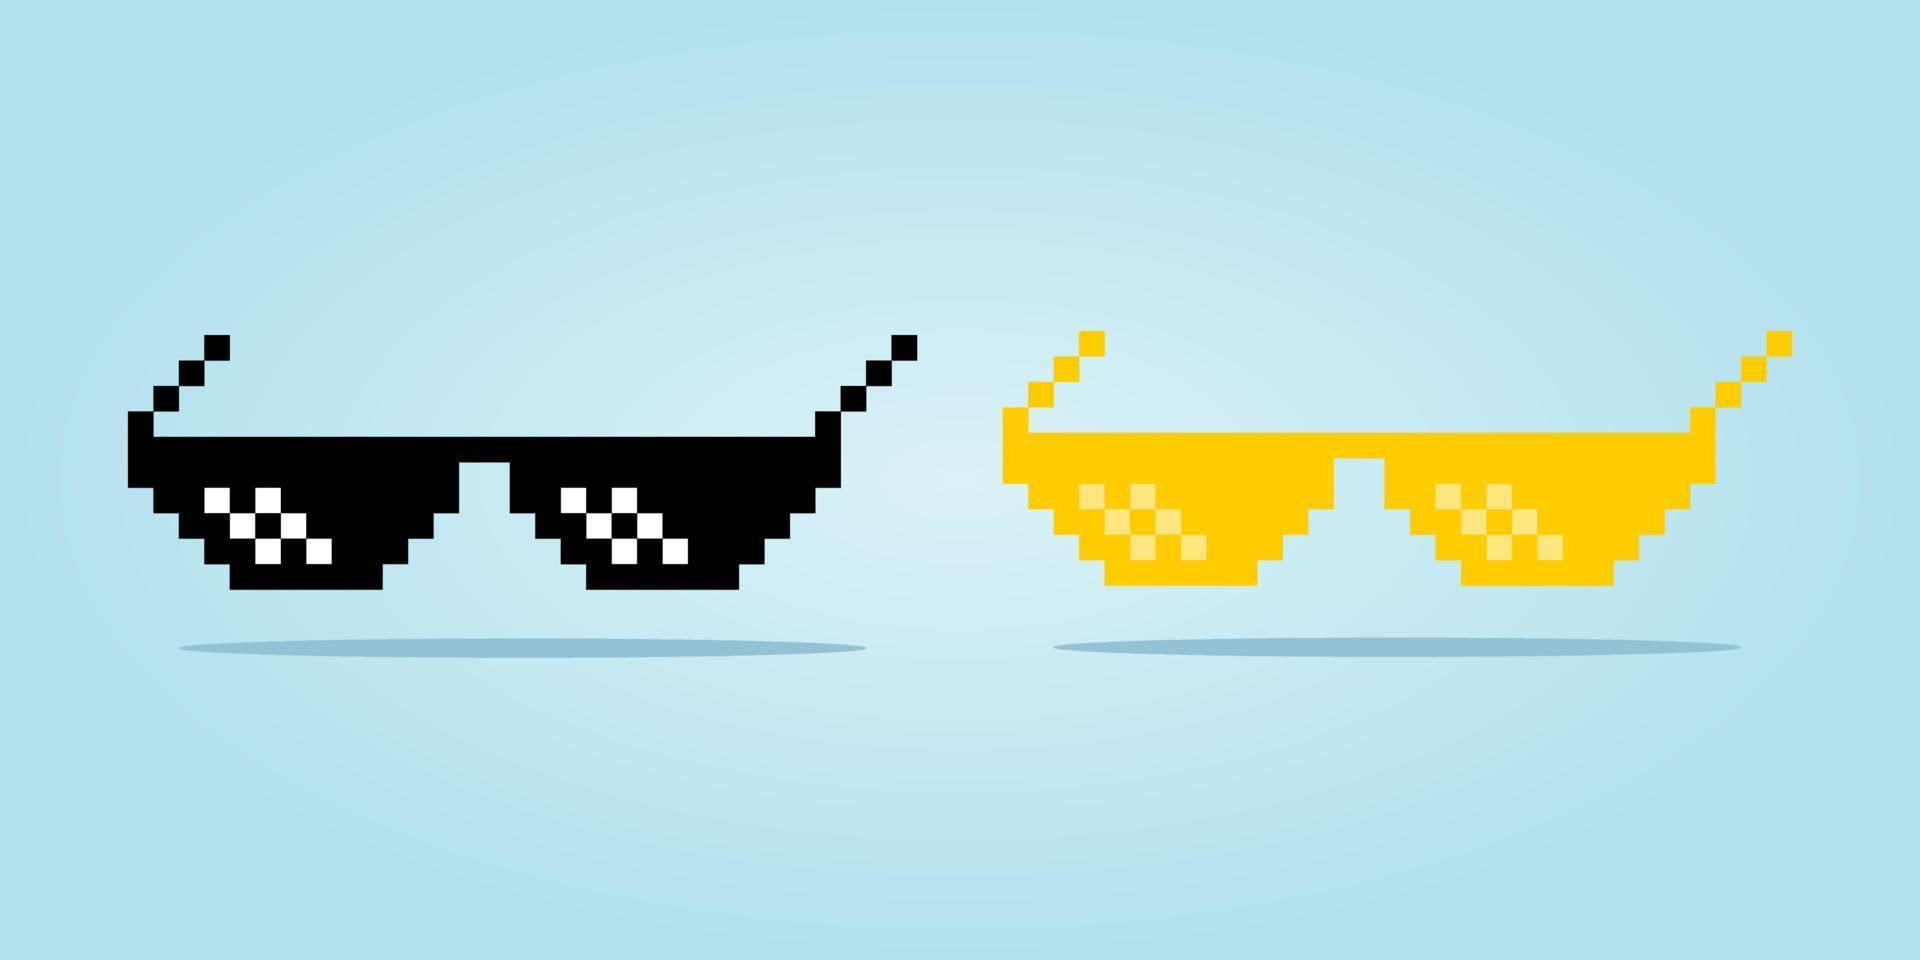 8 bit pixel glasses. accessories for game assets and cross stitch patterns in vector illustrations.